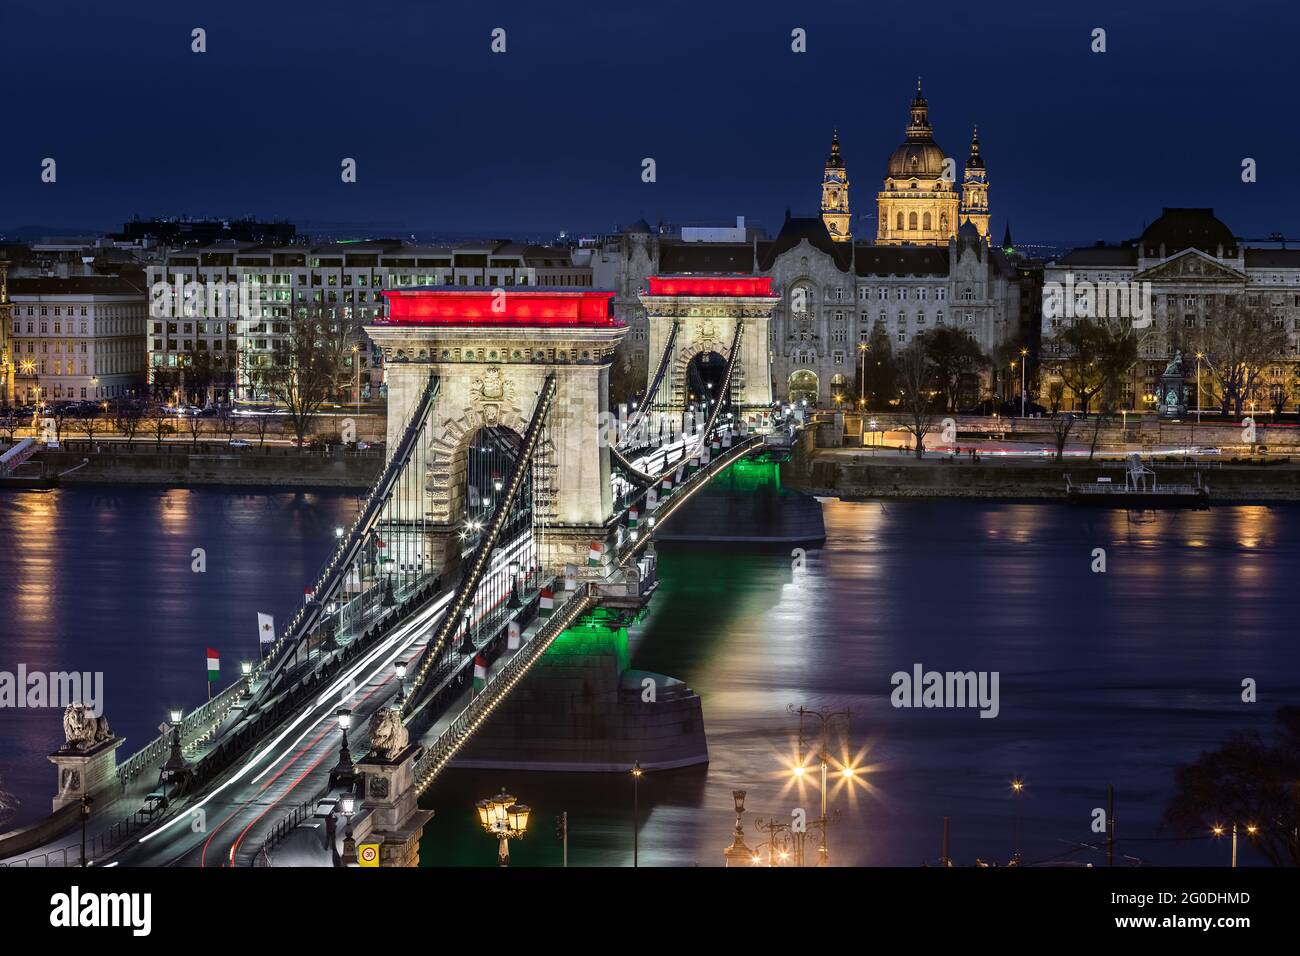 Budapest, Hungary - The world famous illuminated Szechenyi Chain Bridge (Lanchid) by night, lit up with national red, white and green colors with St.S Stock Photo